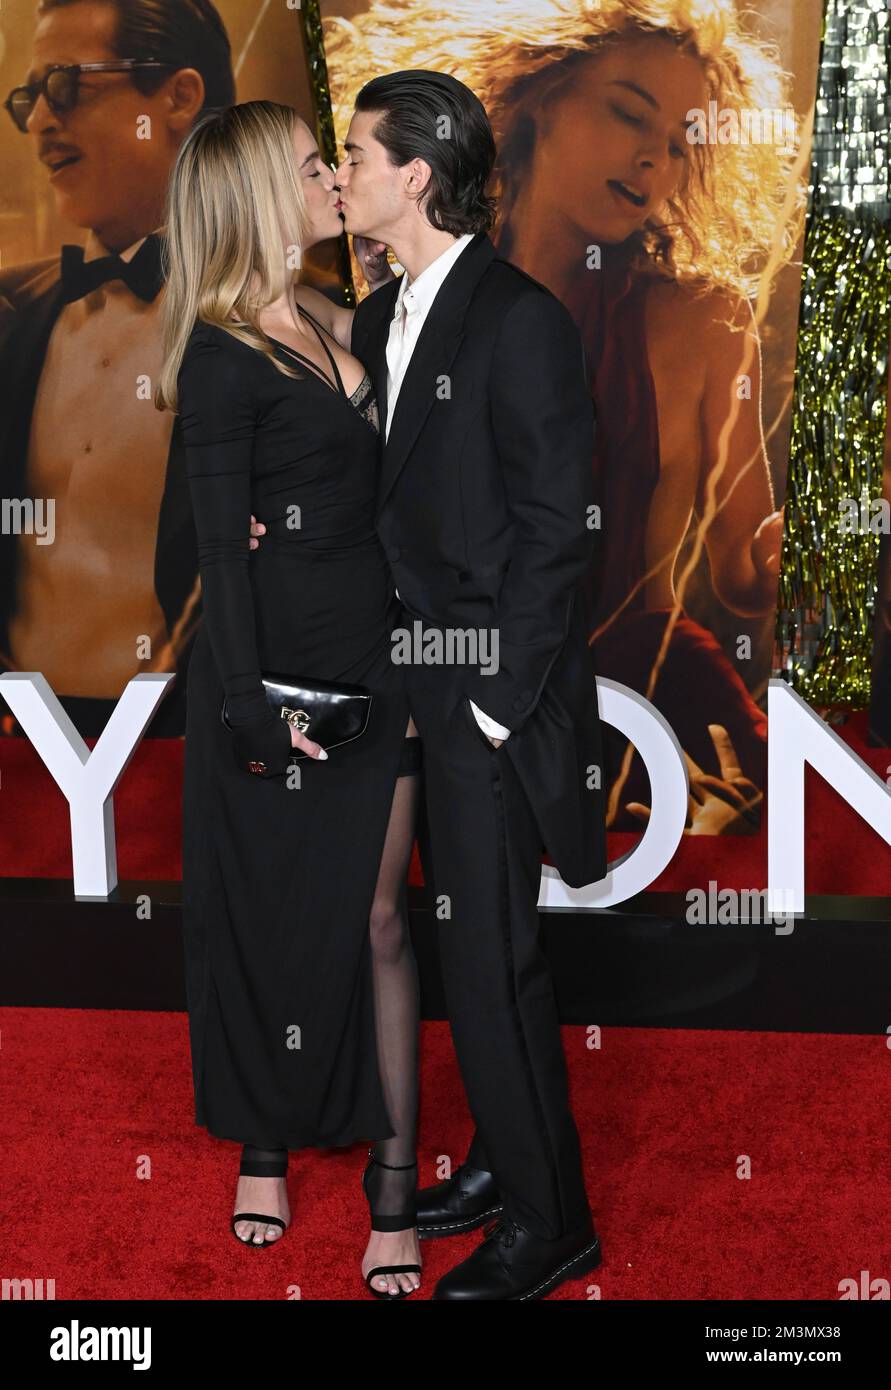 Los Angeles, USA. 15th Dec, 2022. Emma Brooks McAllister & Zack Lugo at the premiere for 'Babylon' at the Academy Museum of Motion Pictures. Picture Credit: Paul Smith/Alamy Live News Stock Photo